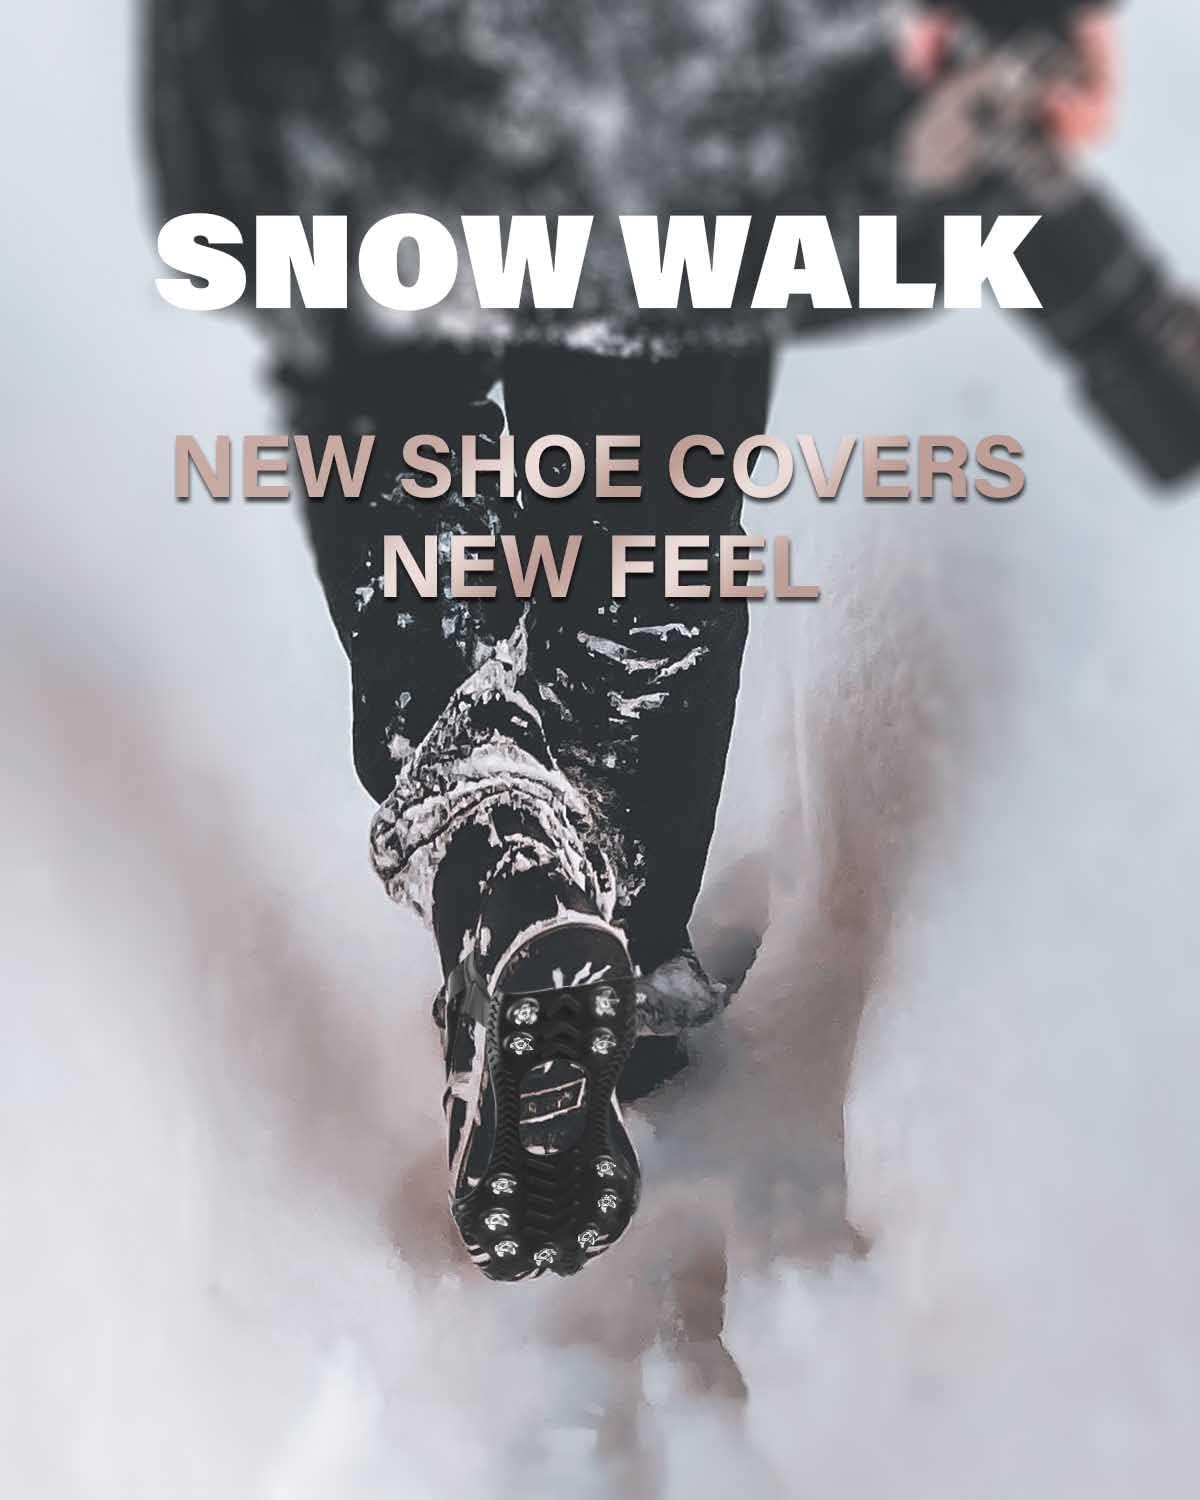 11 Spikes Crampons, Upgraded Version Stainless Steel Anti-Slip, Ice Cleats  Grips for Hiking Shoes and Boots, Hiking Fishing Walking Mountaineering  Black Upgrade Stainless steel LargeUS Men:8-10.5 Women:10-11/EU:42-44